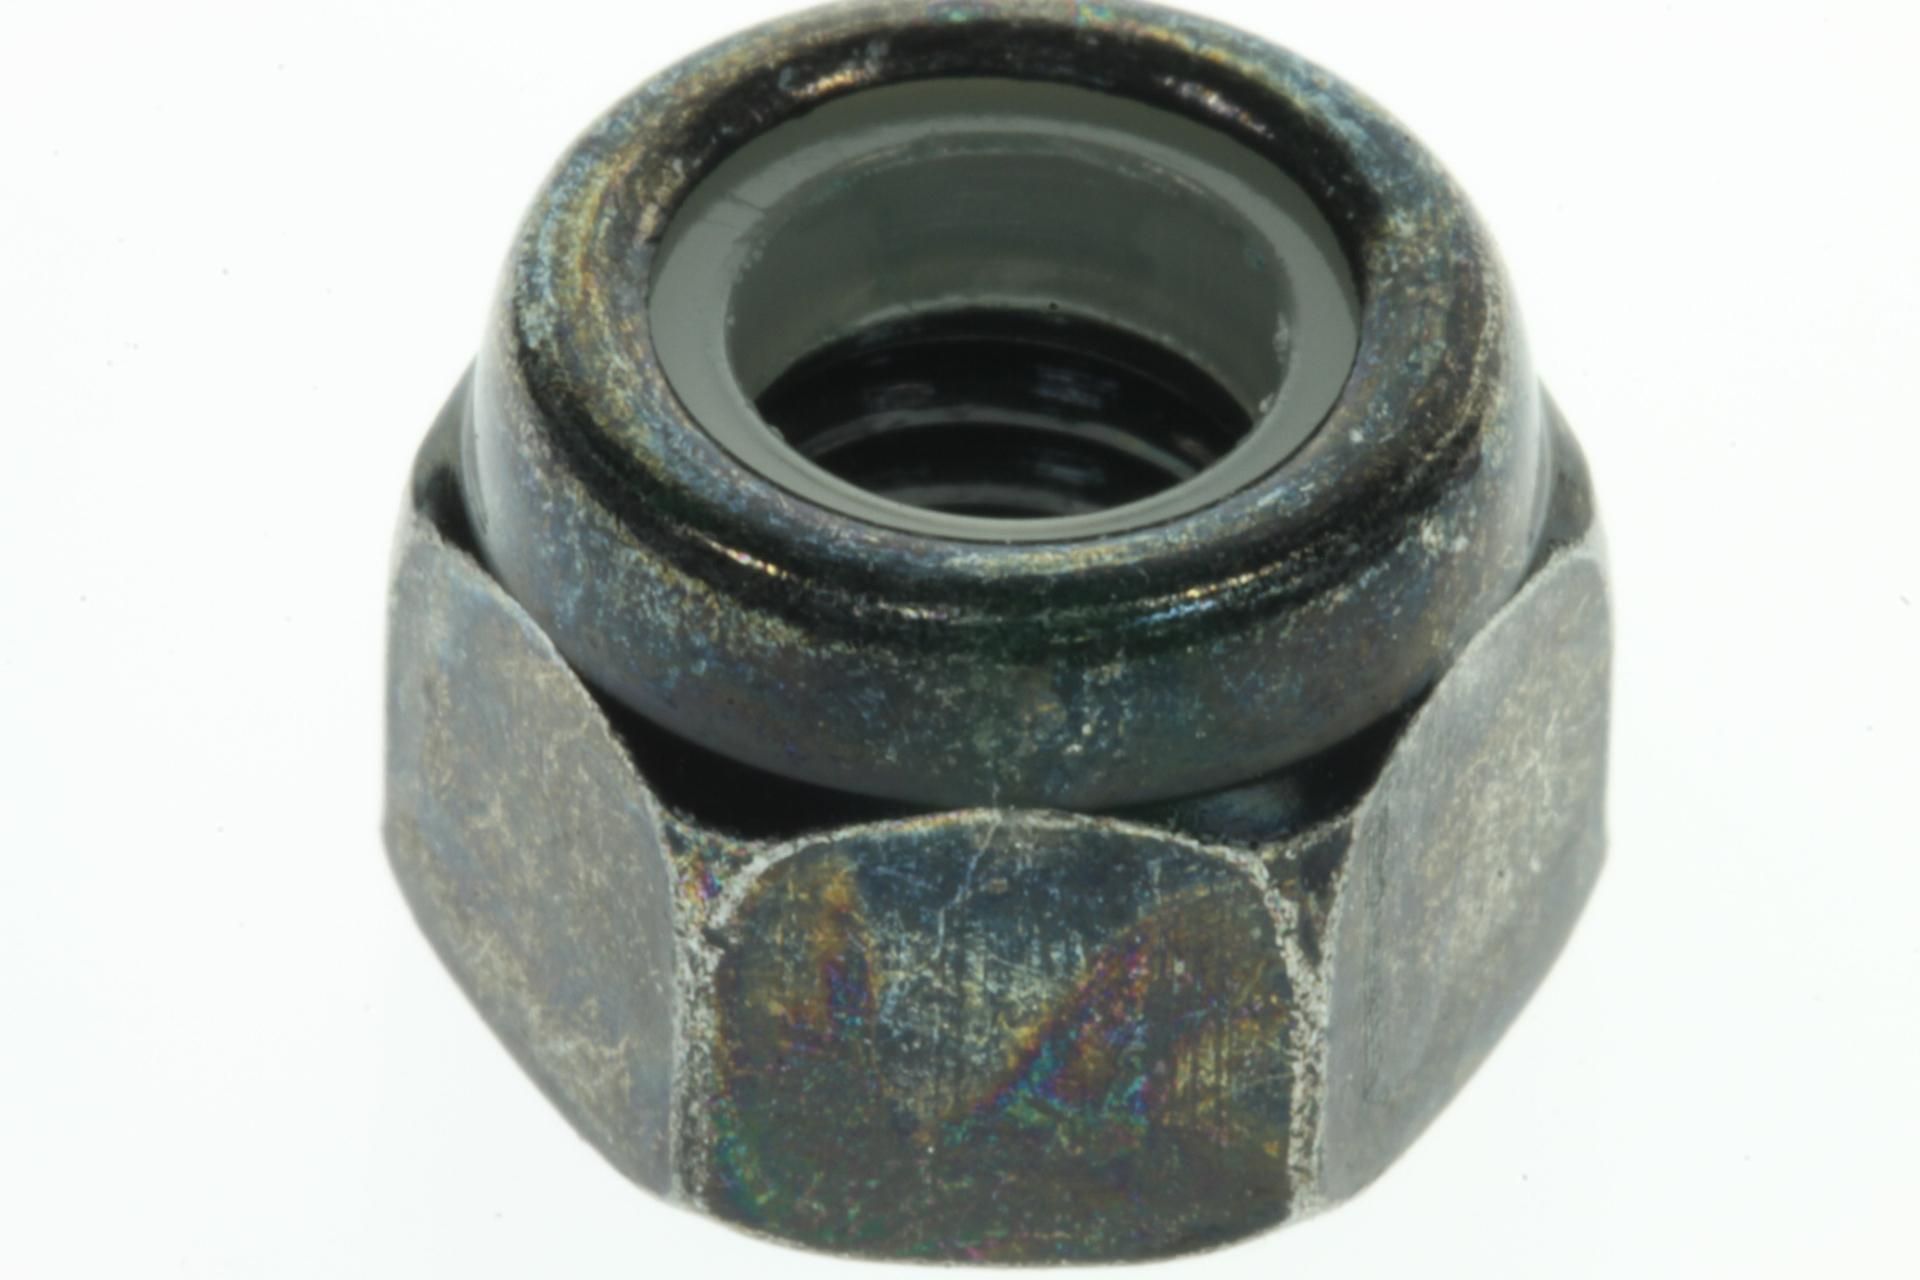 603-24149-00-00 Superseded by 95707-06300-00 - NUT,FLANGE